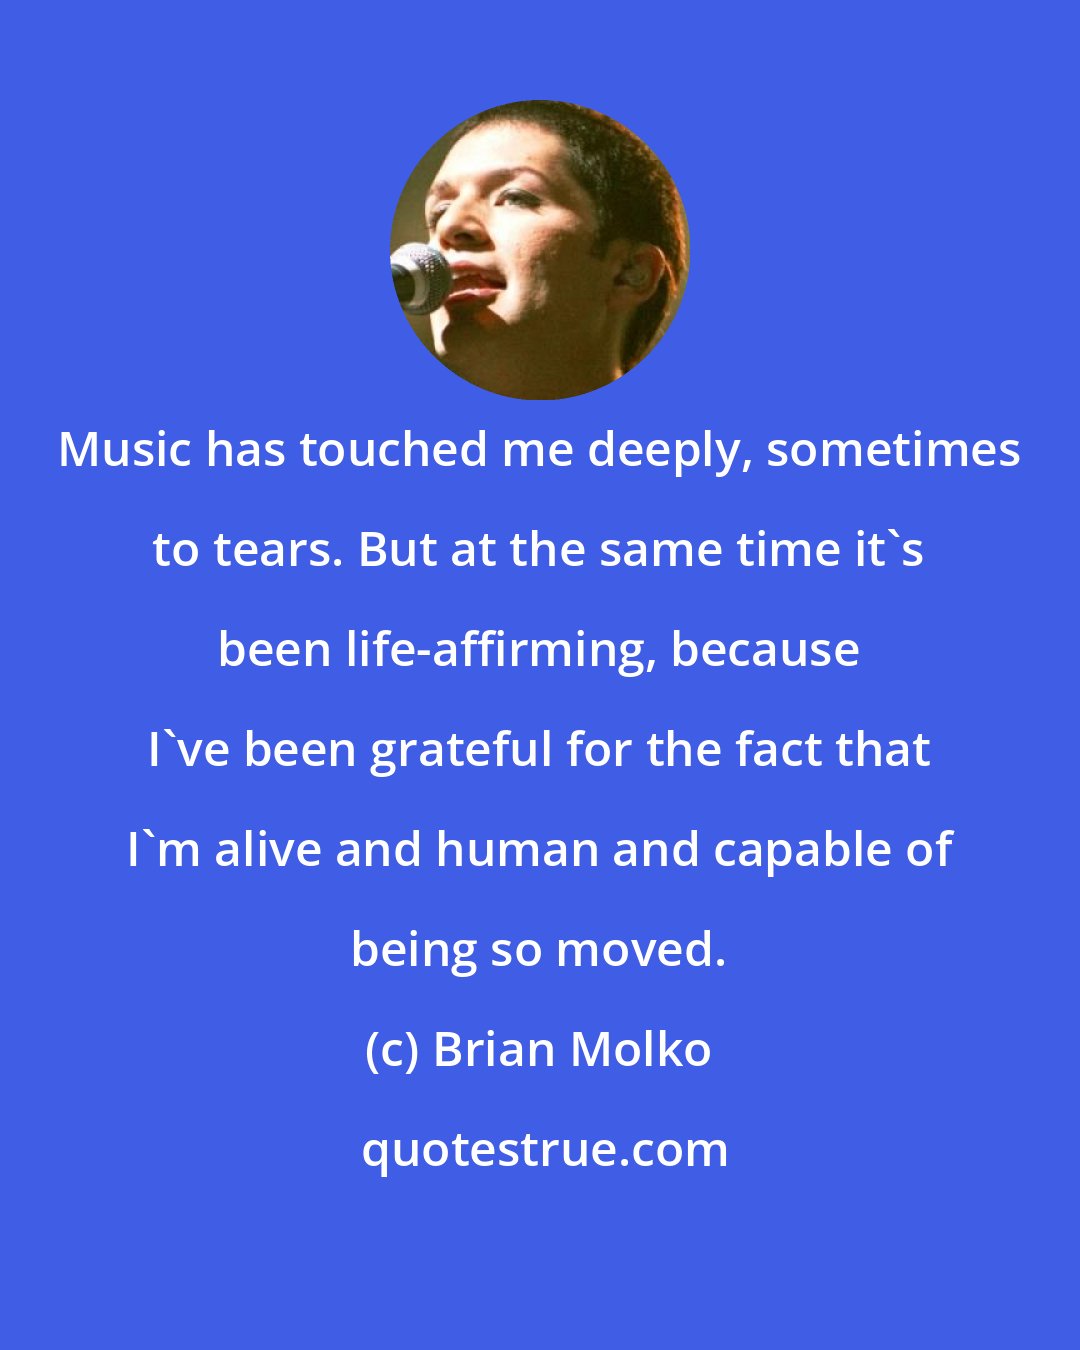 Brian Molko: Music has touched me deeply, sometimes to tears. But at the same time it's been life-affirming, because I've been grateful for the fact that I'm alive and human and capable of being so moved.